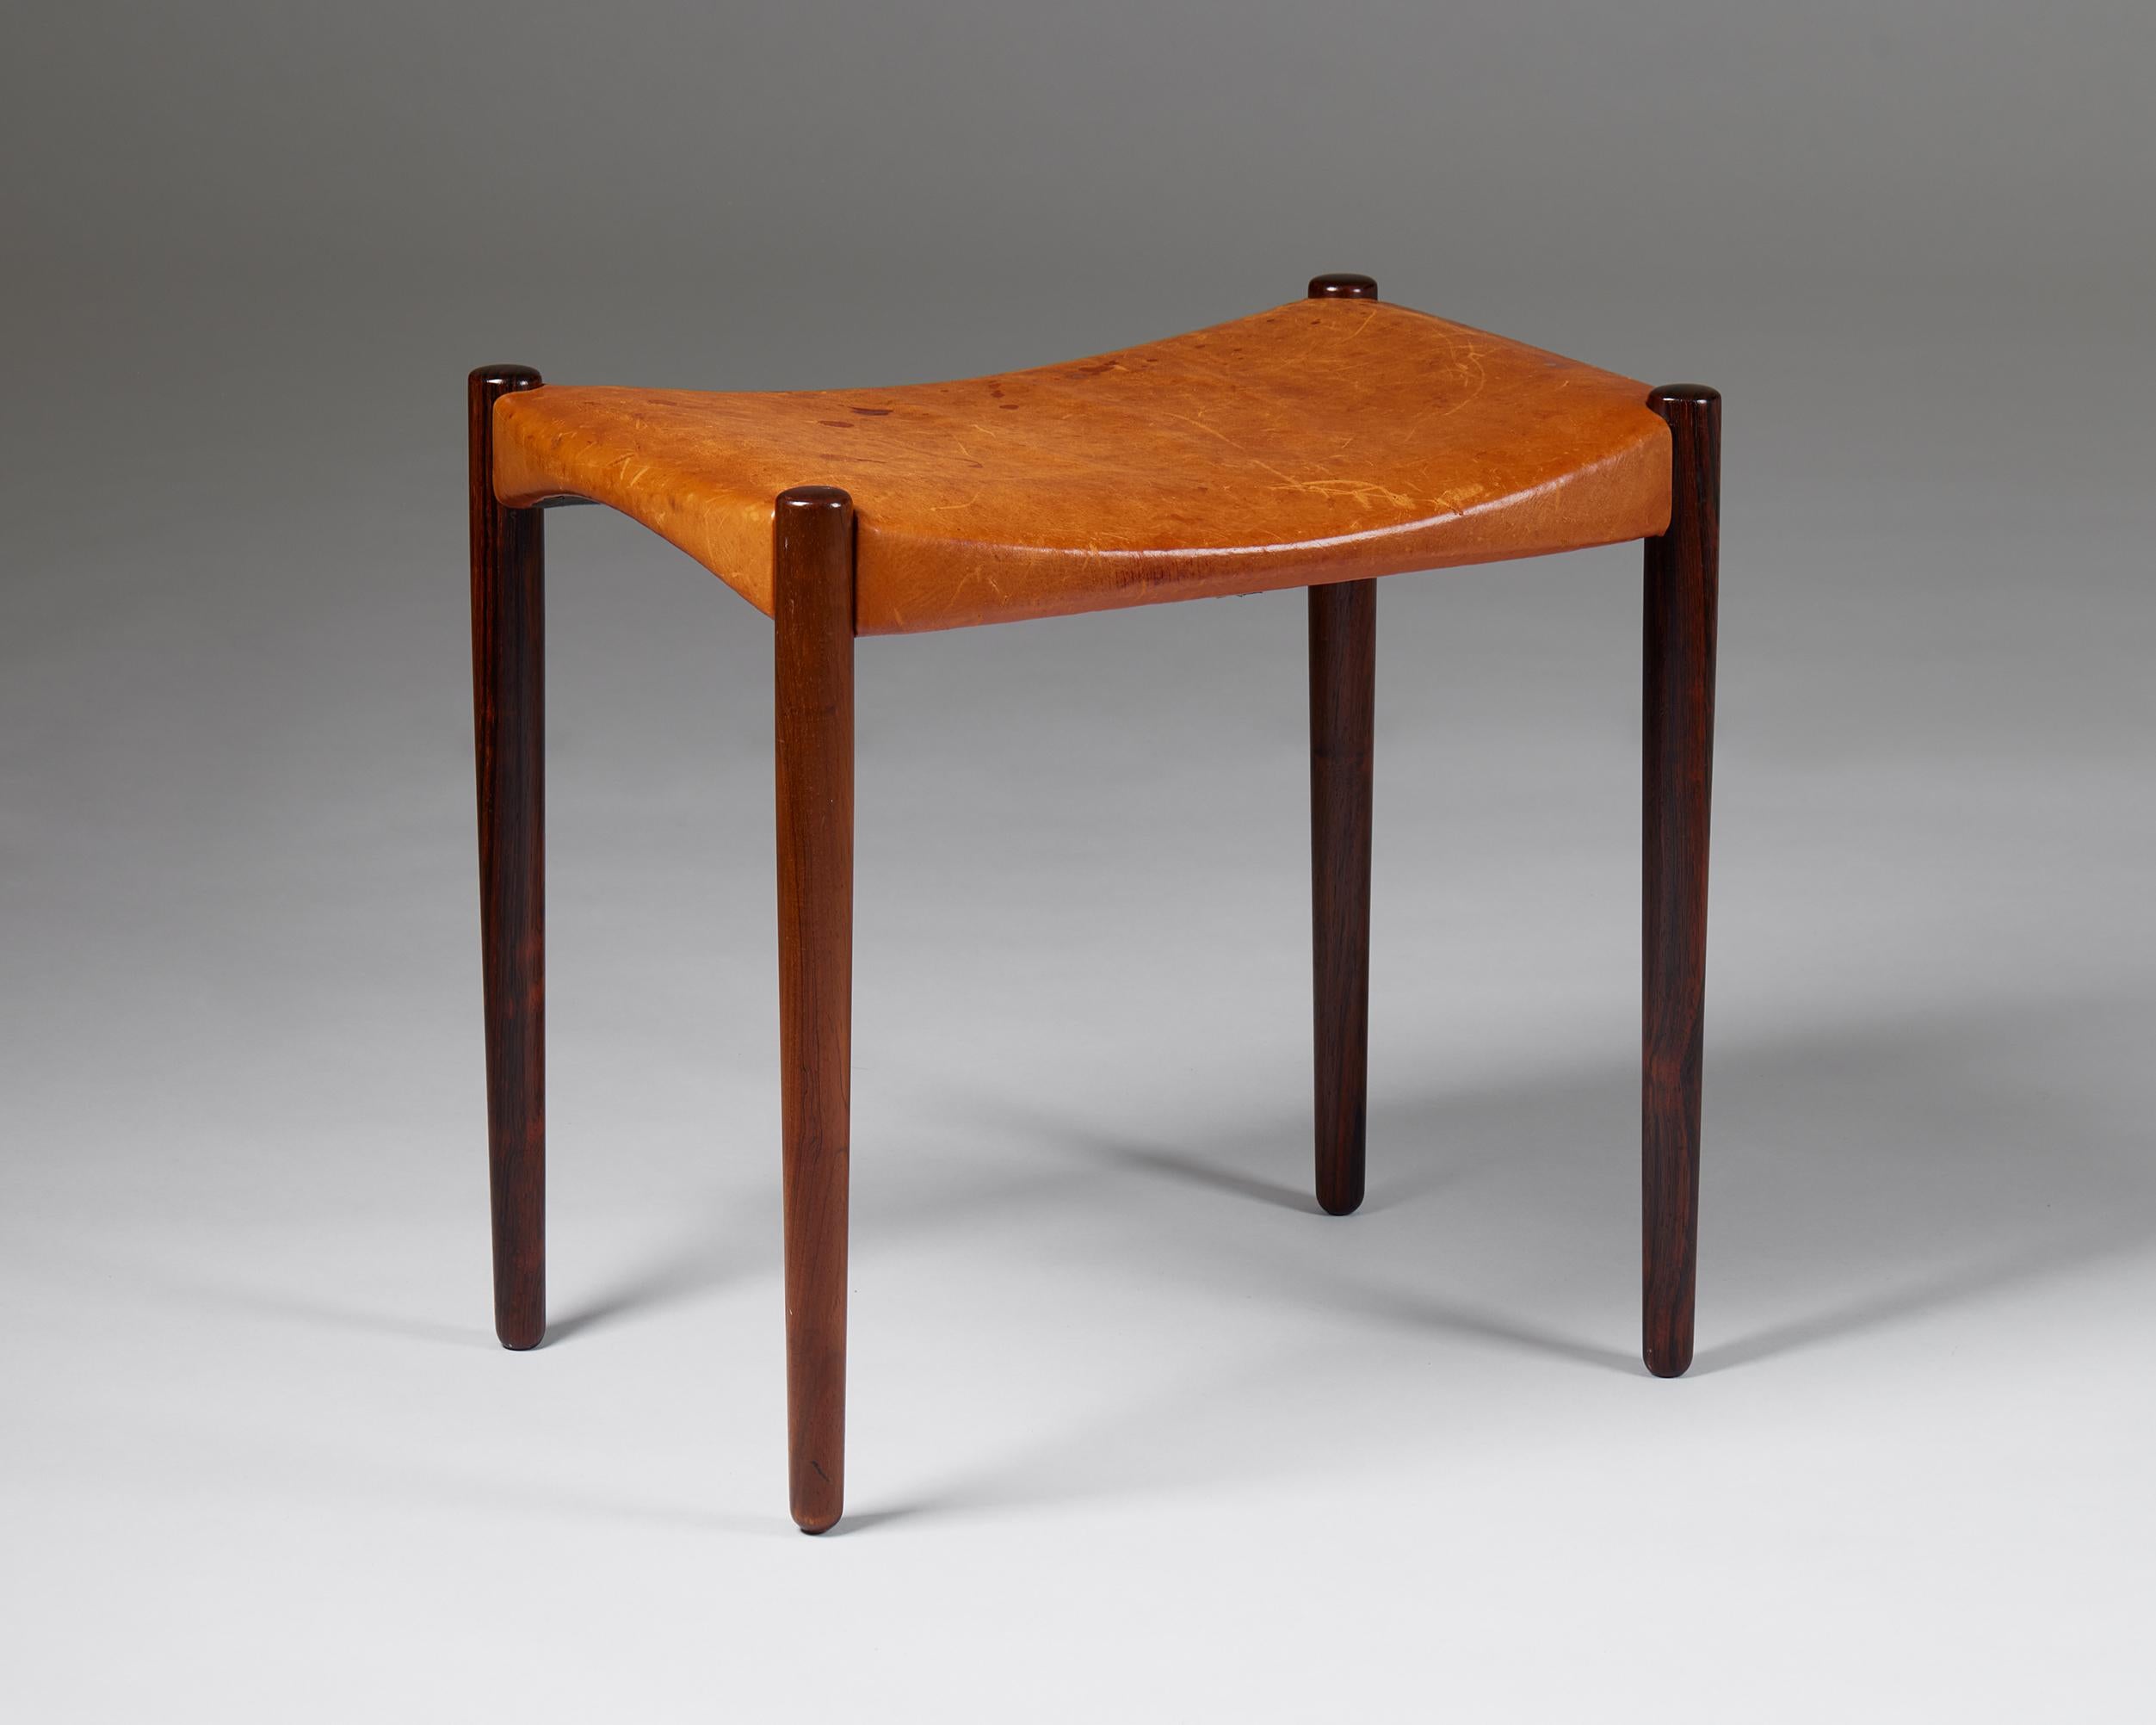 Stool designed by Ejner Larsen and Aksel Bender Madsen for Willy Beck,
Denmark, 1950s.

Brazilian rosewood and leather.

Marked.

Dimensions:
H: 50 cm / 19 3/4''
W: 56 cm / 22''
D: 40 cm / 15 3/4''